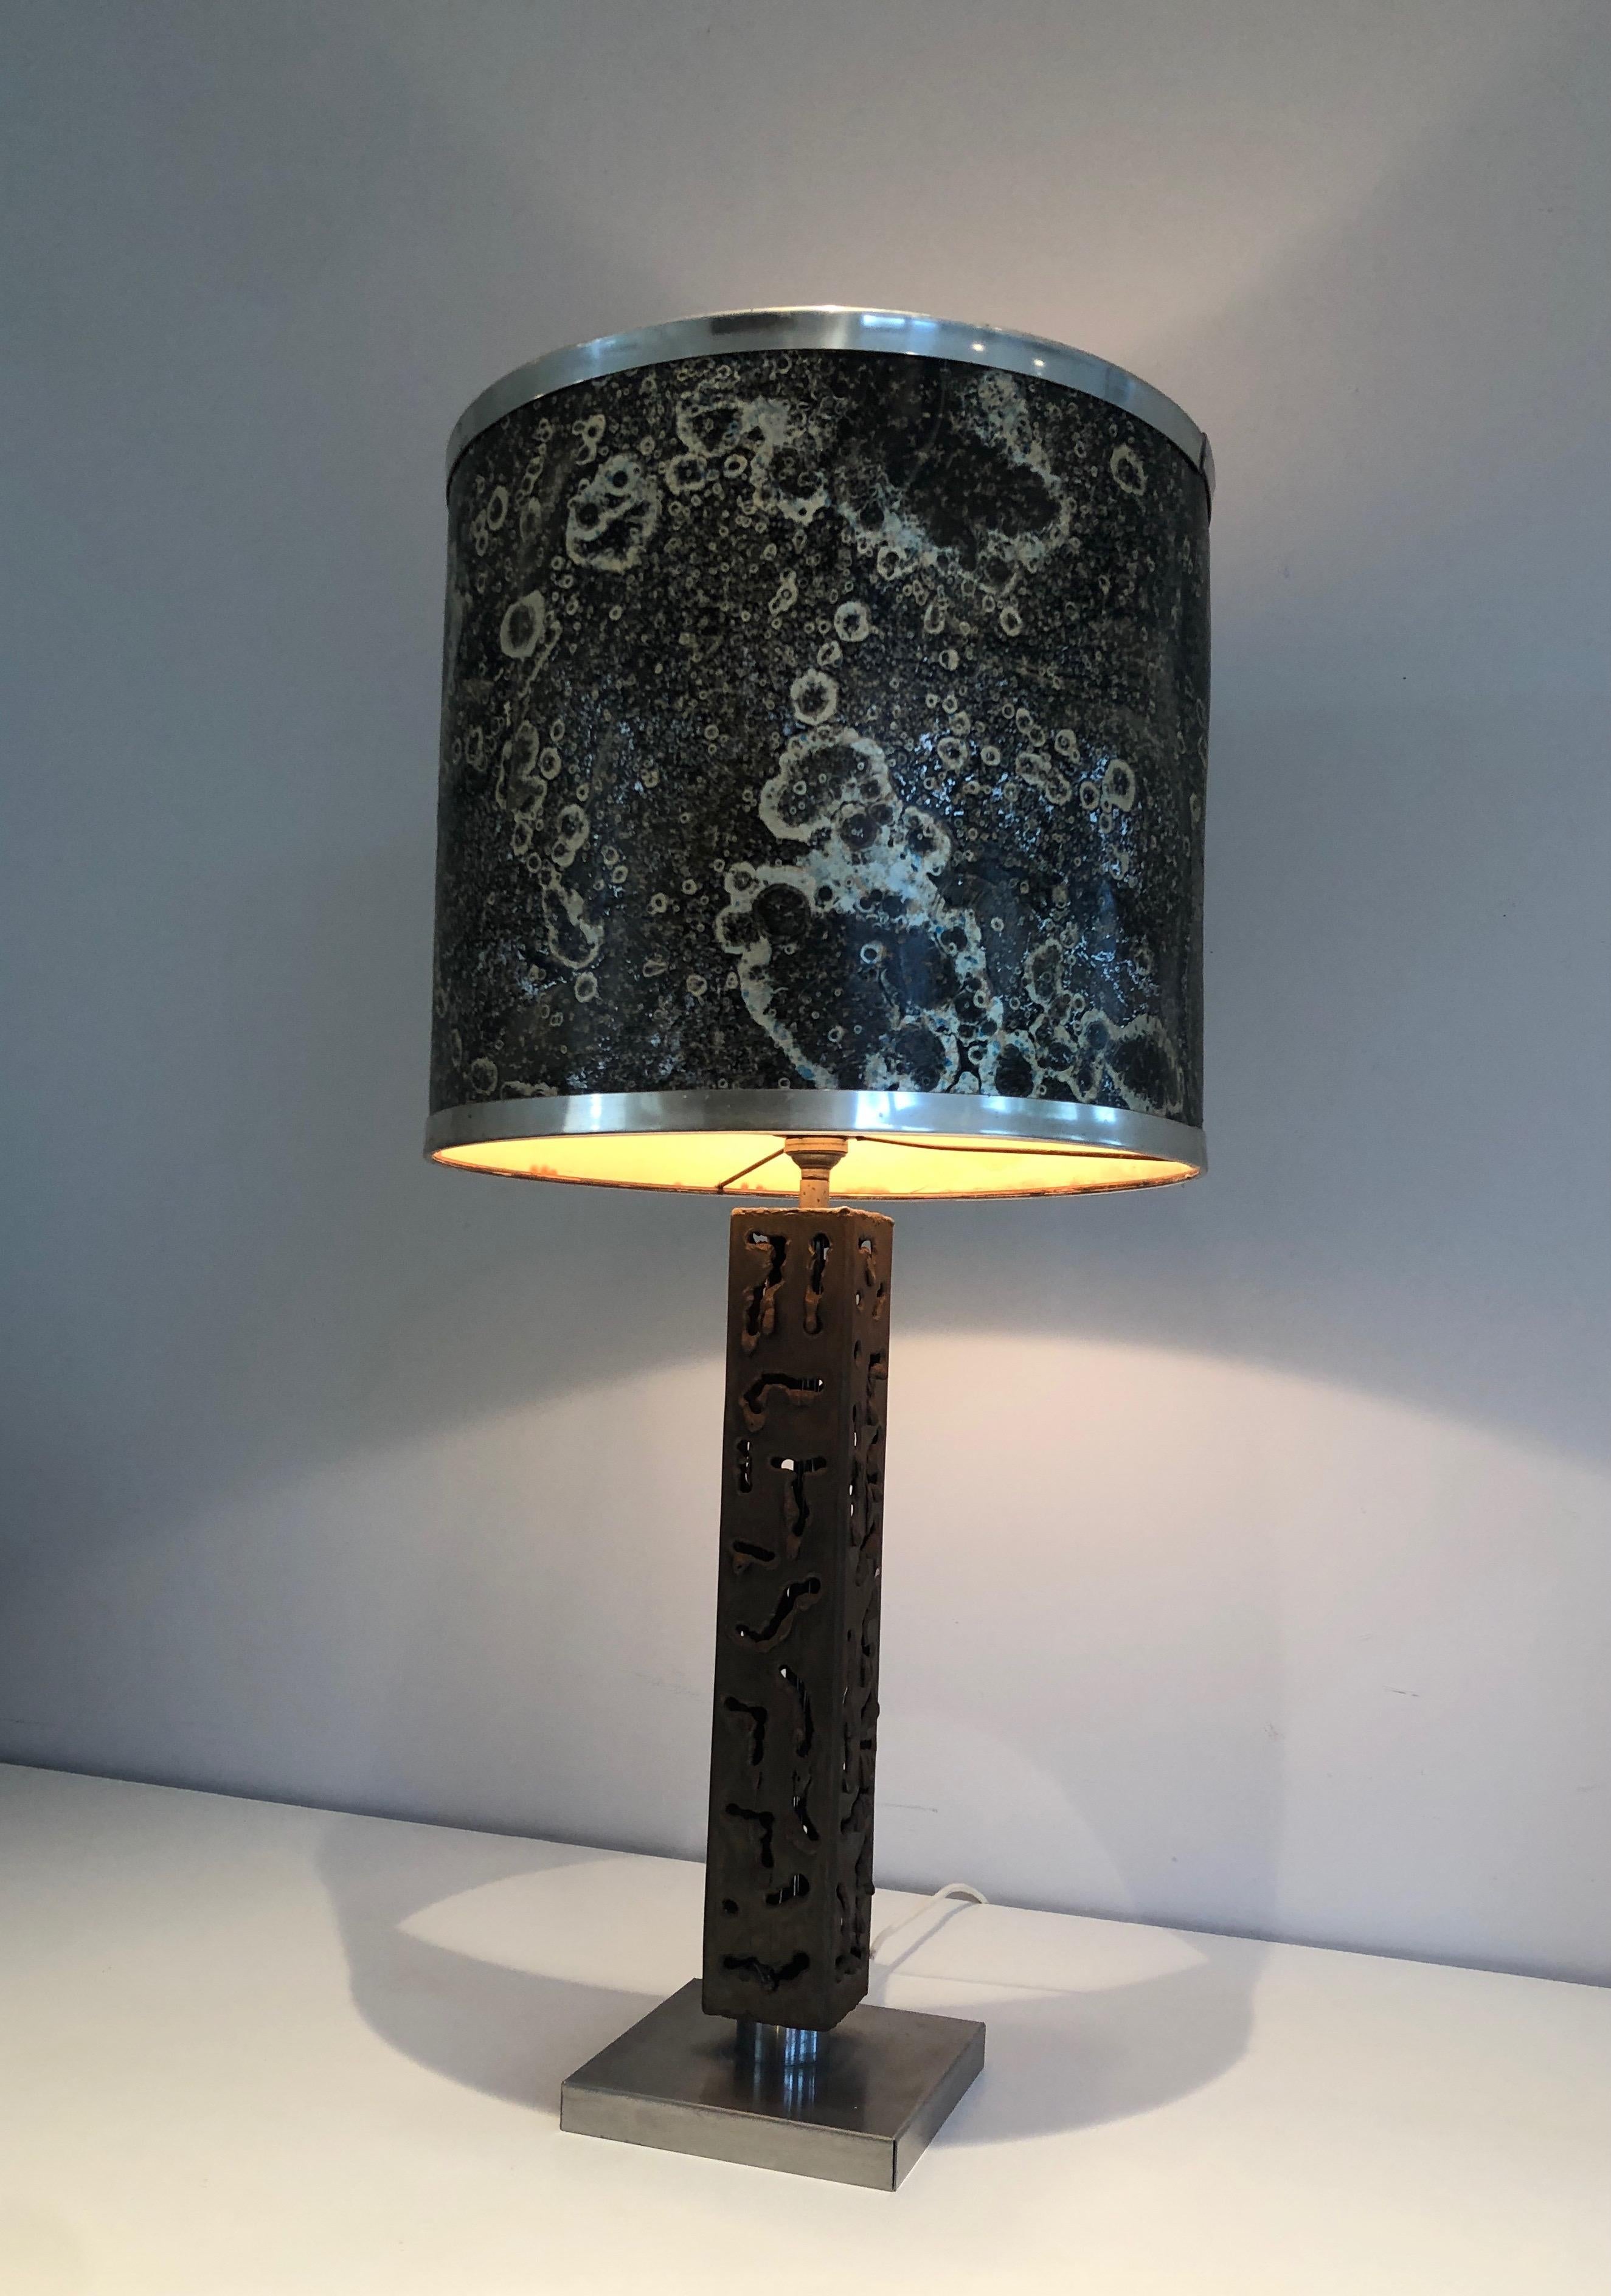 Worked Steel Design Table Lamp, French Work, circa 1970 For Sale 11